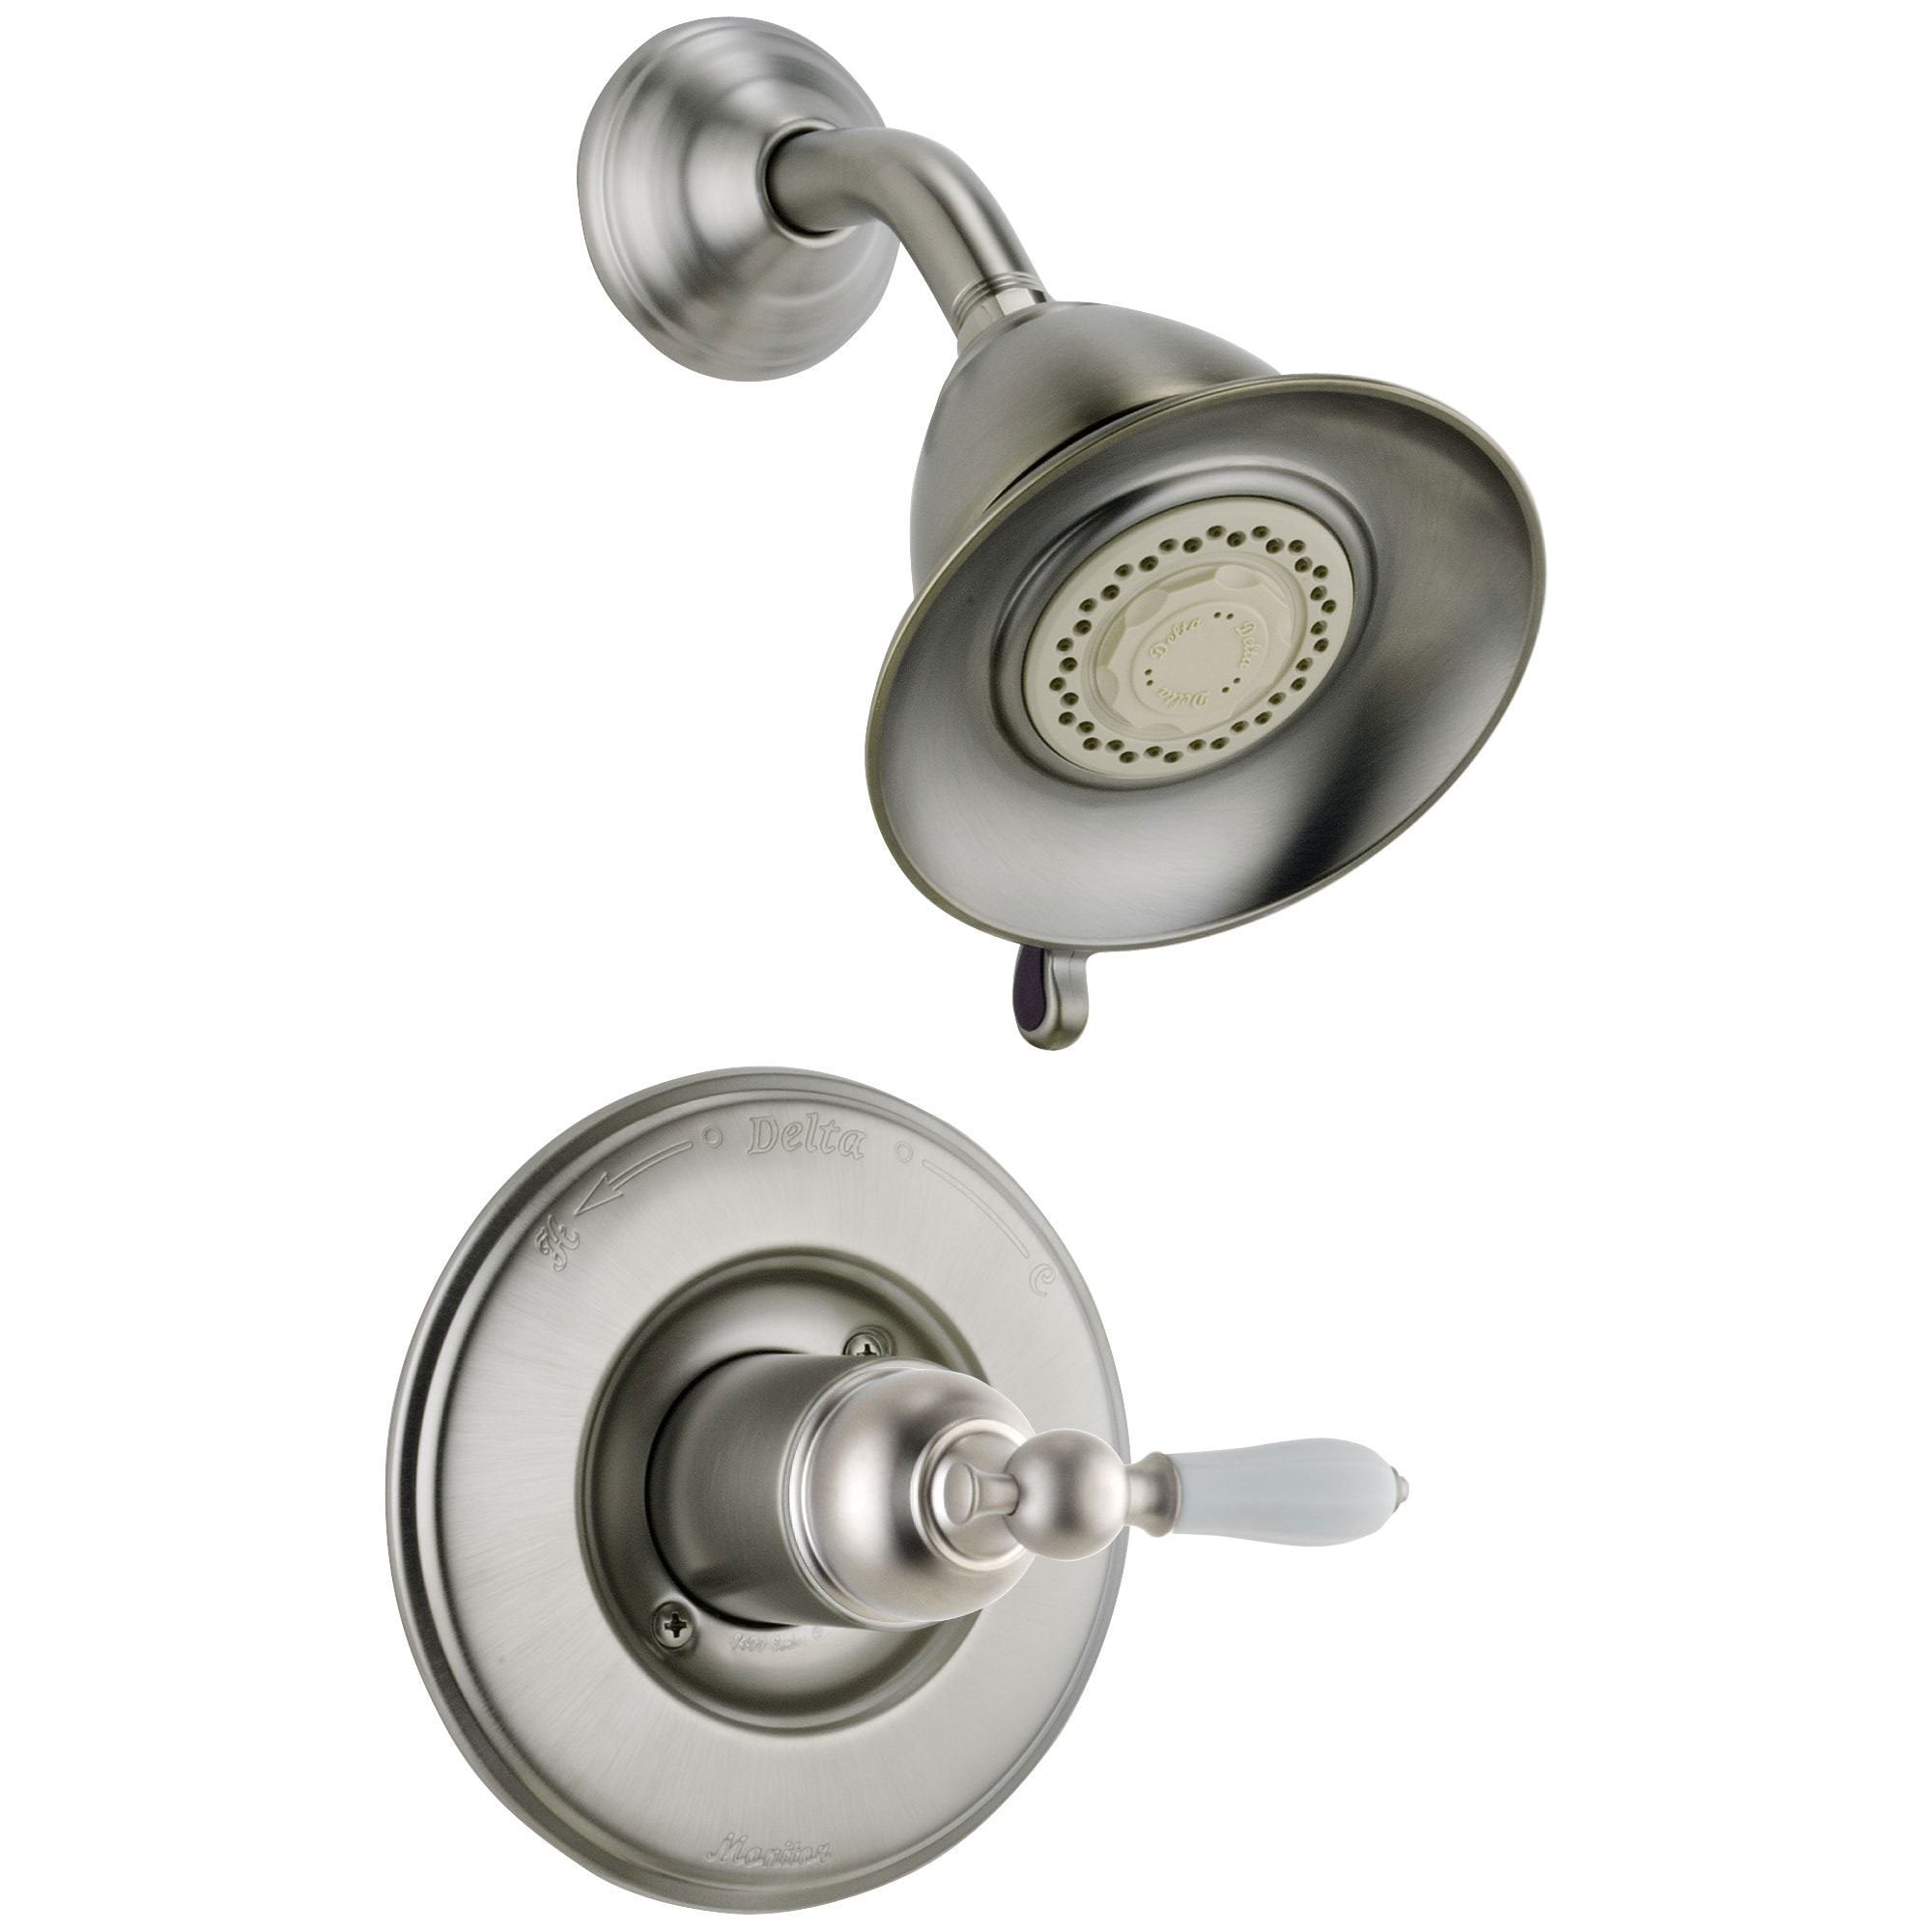 Delta Traditional Victorian Stainless Steel Finish 14 Series Shower Only Faucet INCLUDES Rough-in Valve with Stops and White Lever Handle D1193V